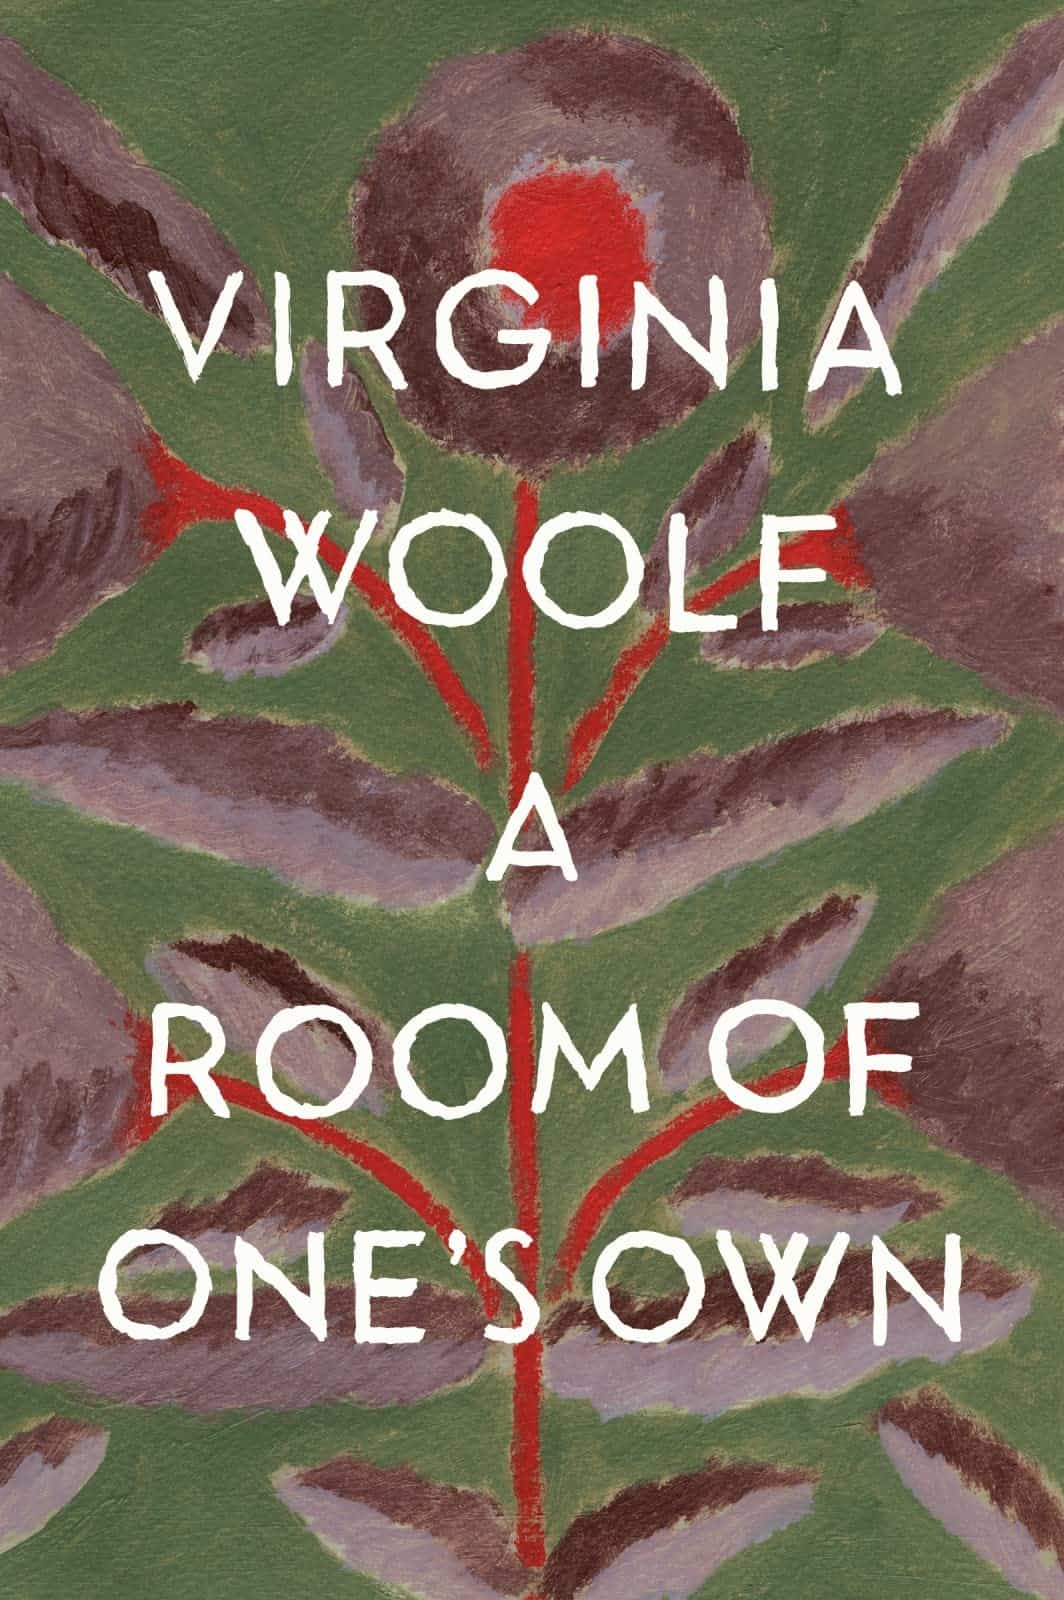 <p>Who said that the best nonfiction books had to be contemporary or scientific? Sometimes, nonfiction is the most engrossing when it's in the form of a personal argumentative essay. Take <em>A Room of One's Own</em>, for instance. </p>    <p>Readers celebrate Virginia Woolf's book for its powerful feminist message advocating for women's independence and female creativity. It remains a thought-provoking and inspiring read nearly a century after publication, encouraging discussions on gender equality and artistic freedom.</p>    <ul> <li><strong>Author:</strong> Virginia Woolf</li>    <li><strong>Page count:</strong> 128</li>    <li><strong>First published:</strong> 1929</li> </ul>